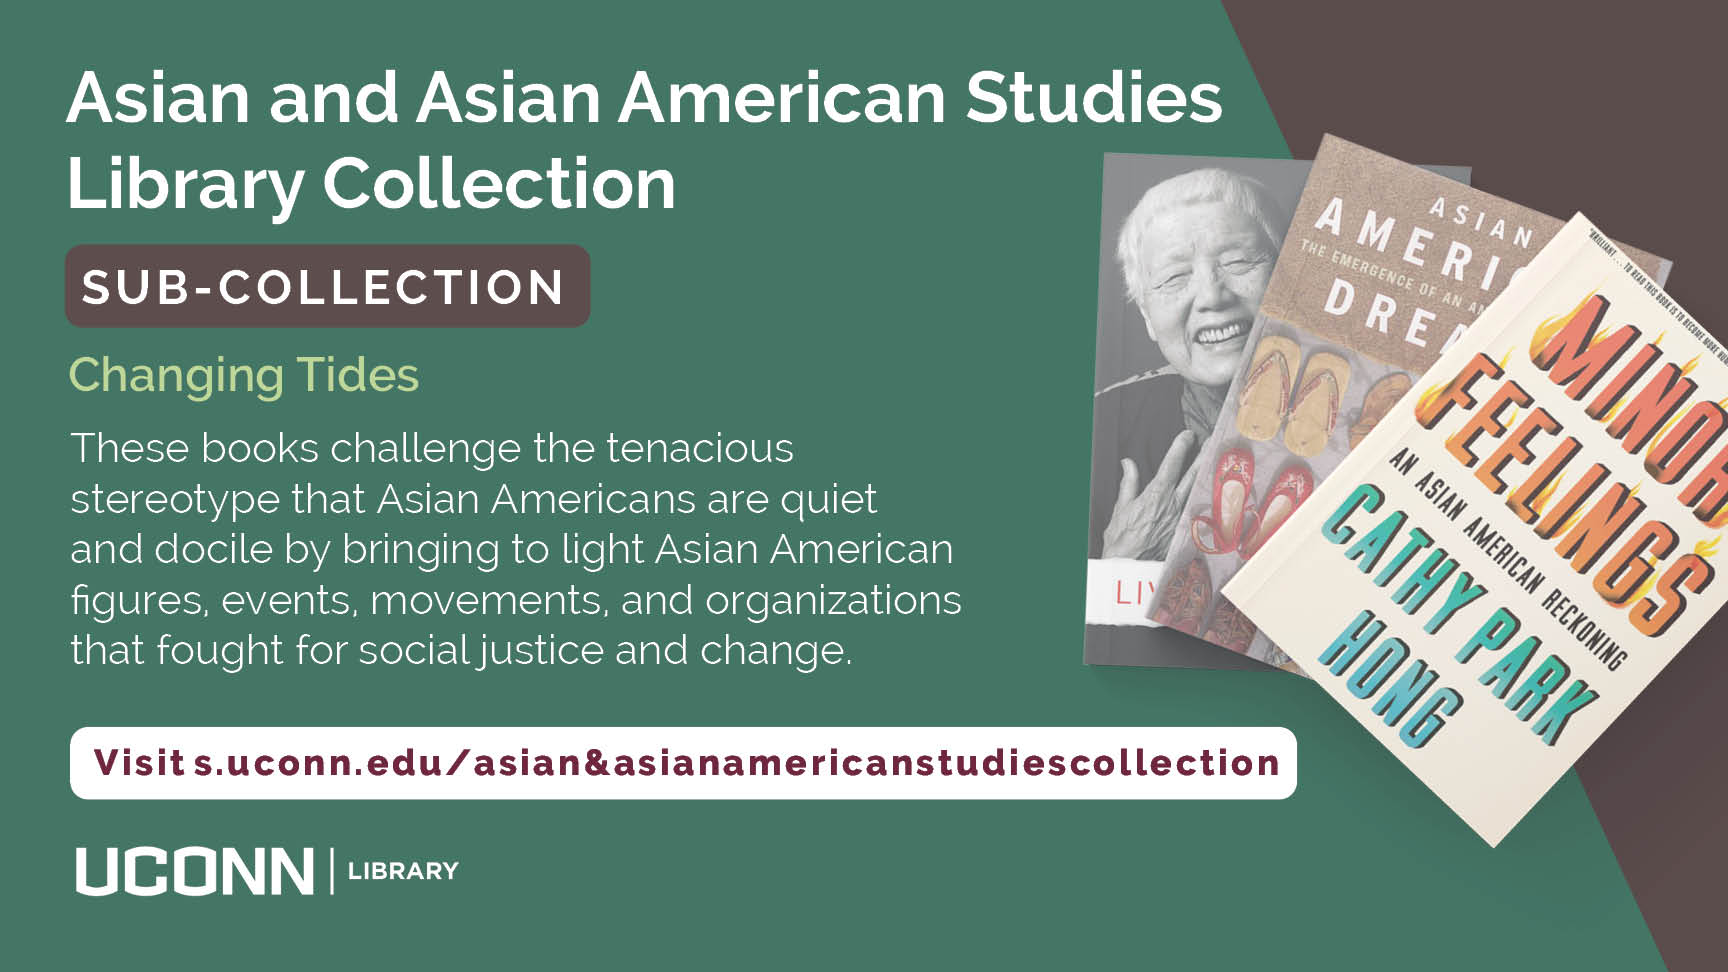 Asian and Asian American Studies Library Collection SUB-COLLECTION Changing Tides These books challenge the tenacious stereotype that Asian Americans are quiet and docile by bringing to light Asian American figures, events, movements, and organizations that fought for social justice and change. Visit s.uconn.edu/asian&asianamericanstudiescollection UConn Library